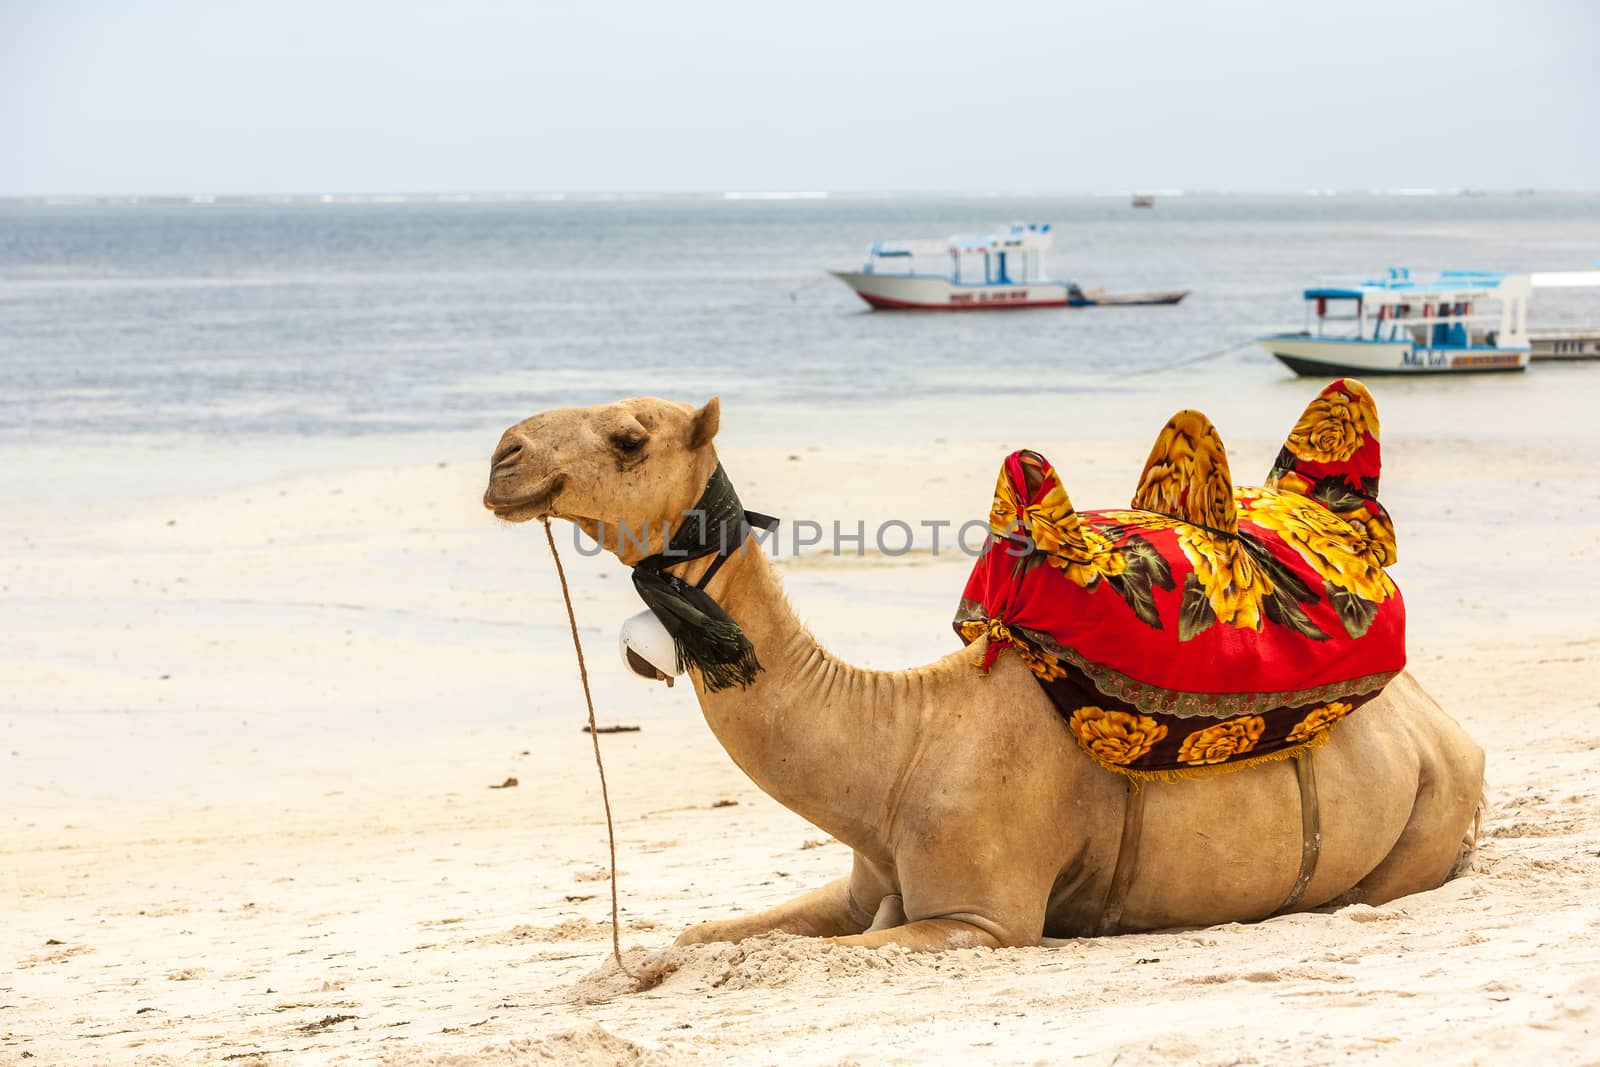 Camel lying on the sand by master1305